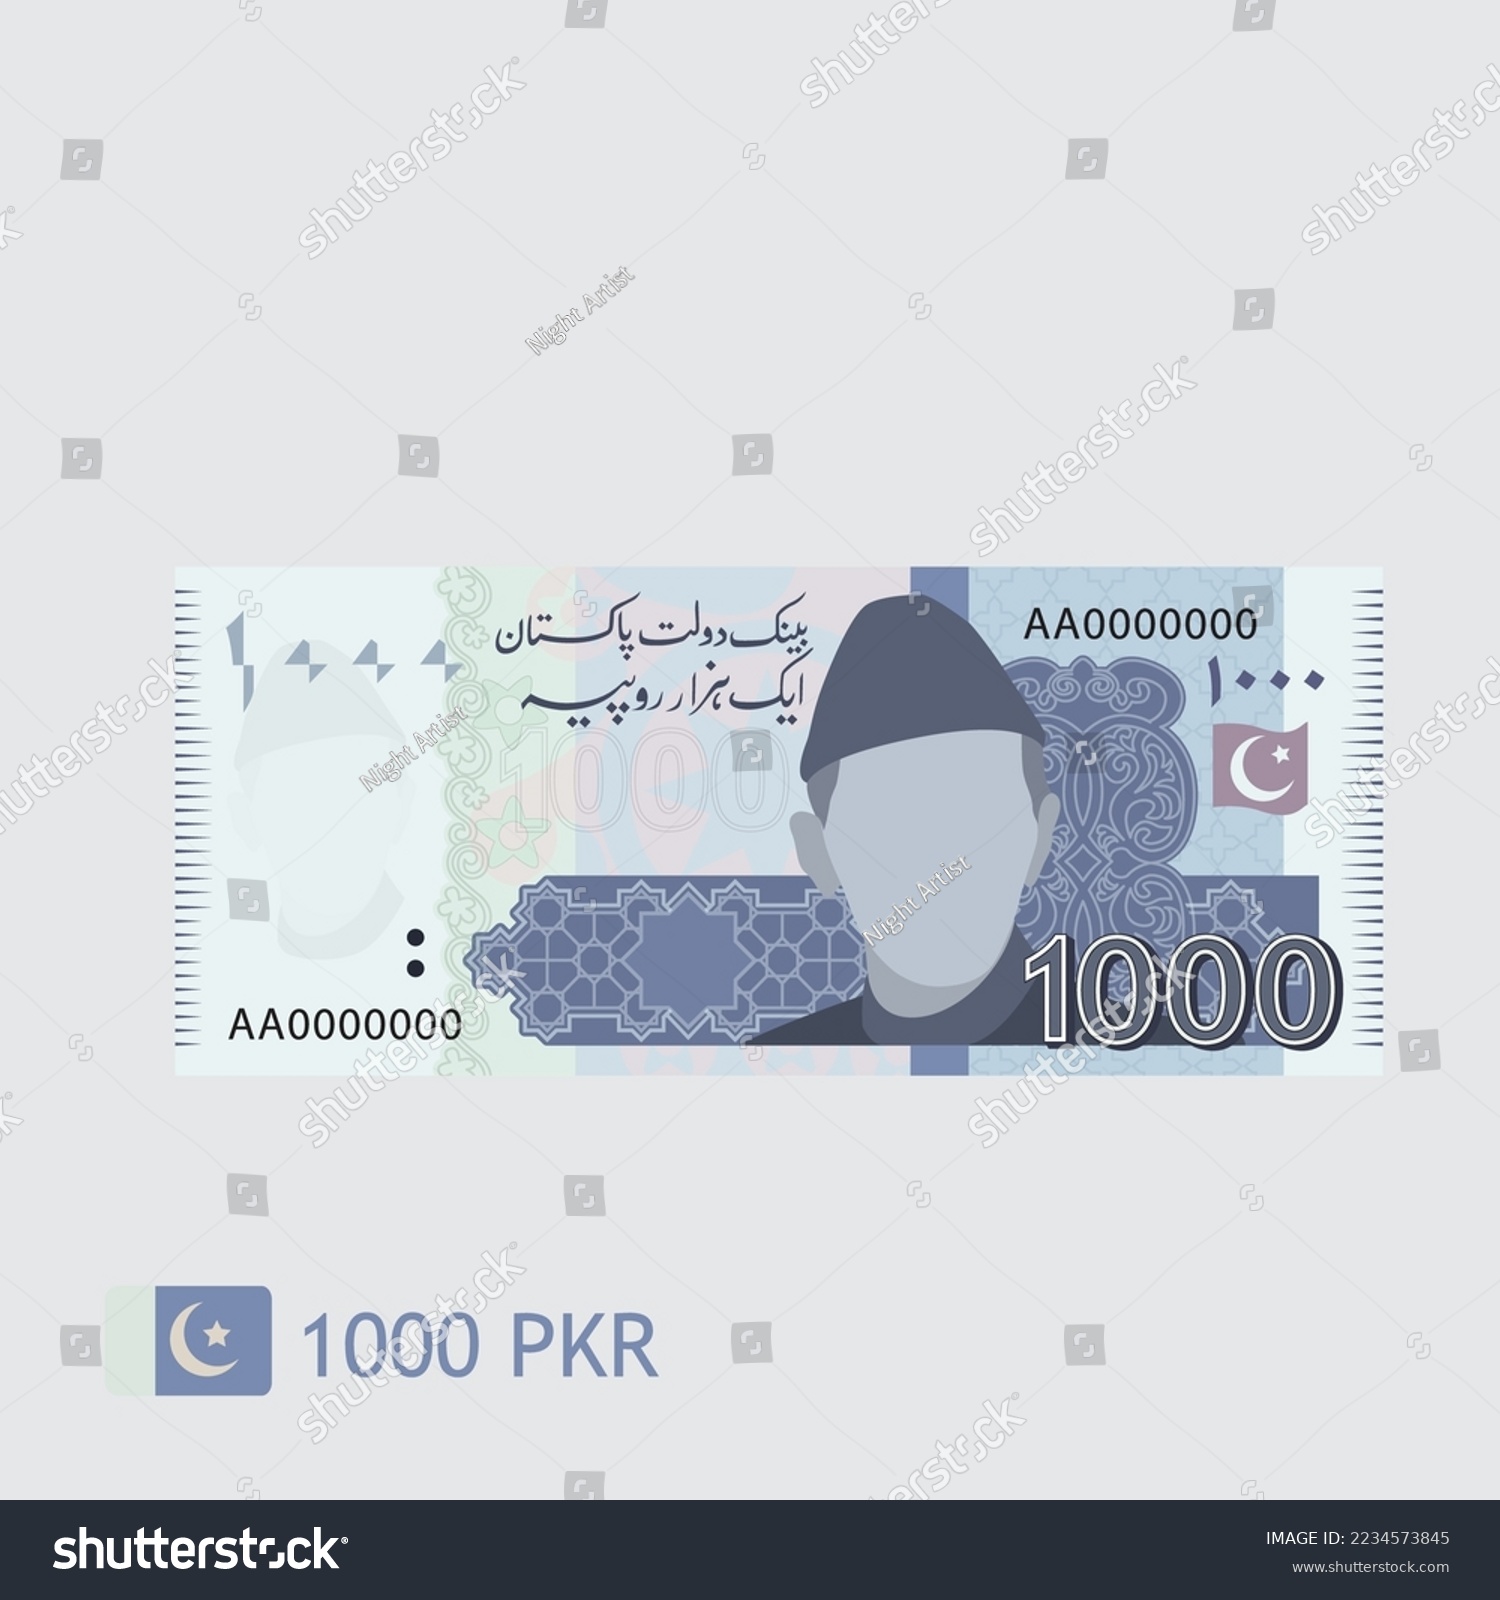 SVG of Currency of Pakistan. One Thousand rupees. flat vector illustration svg